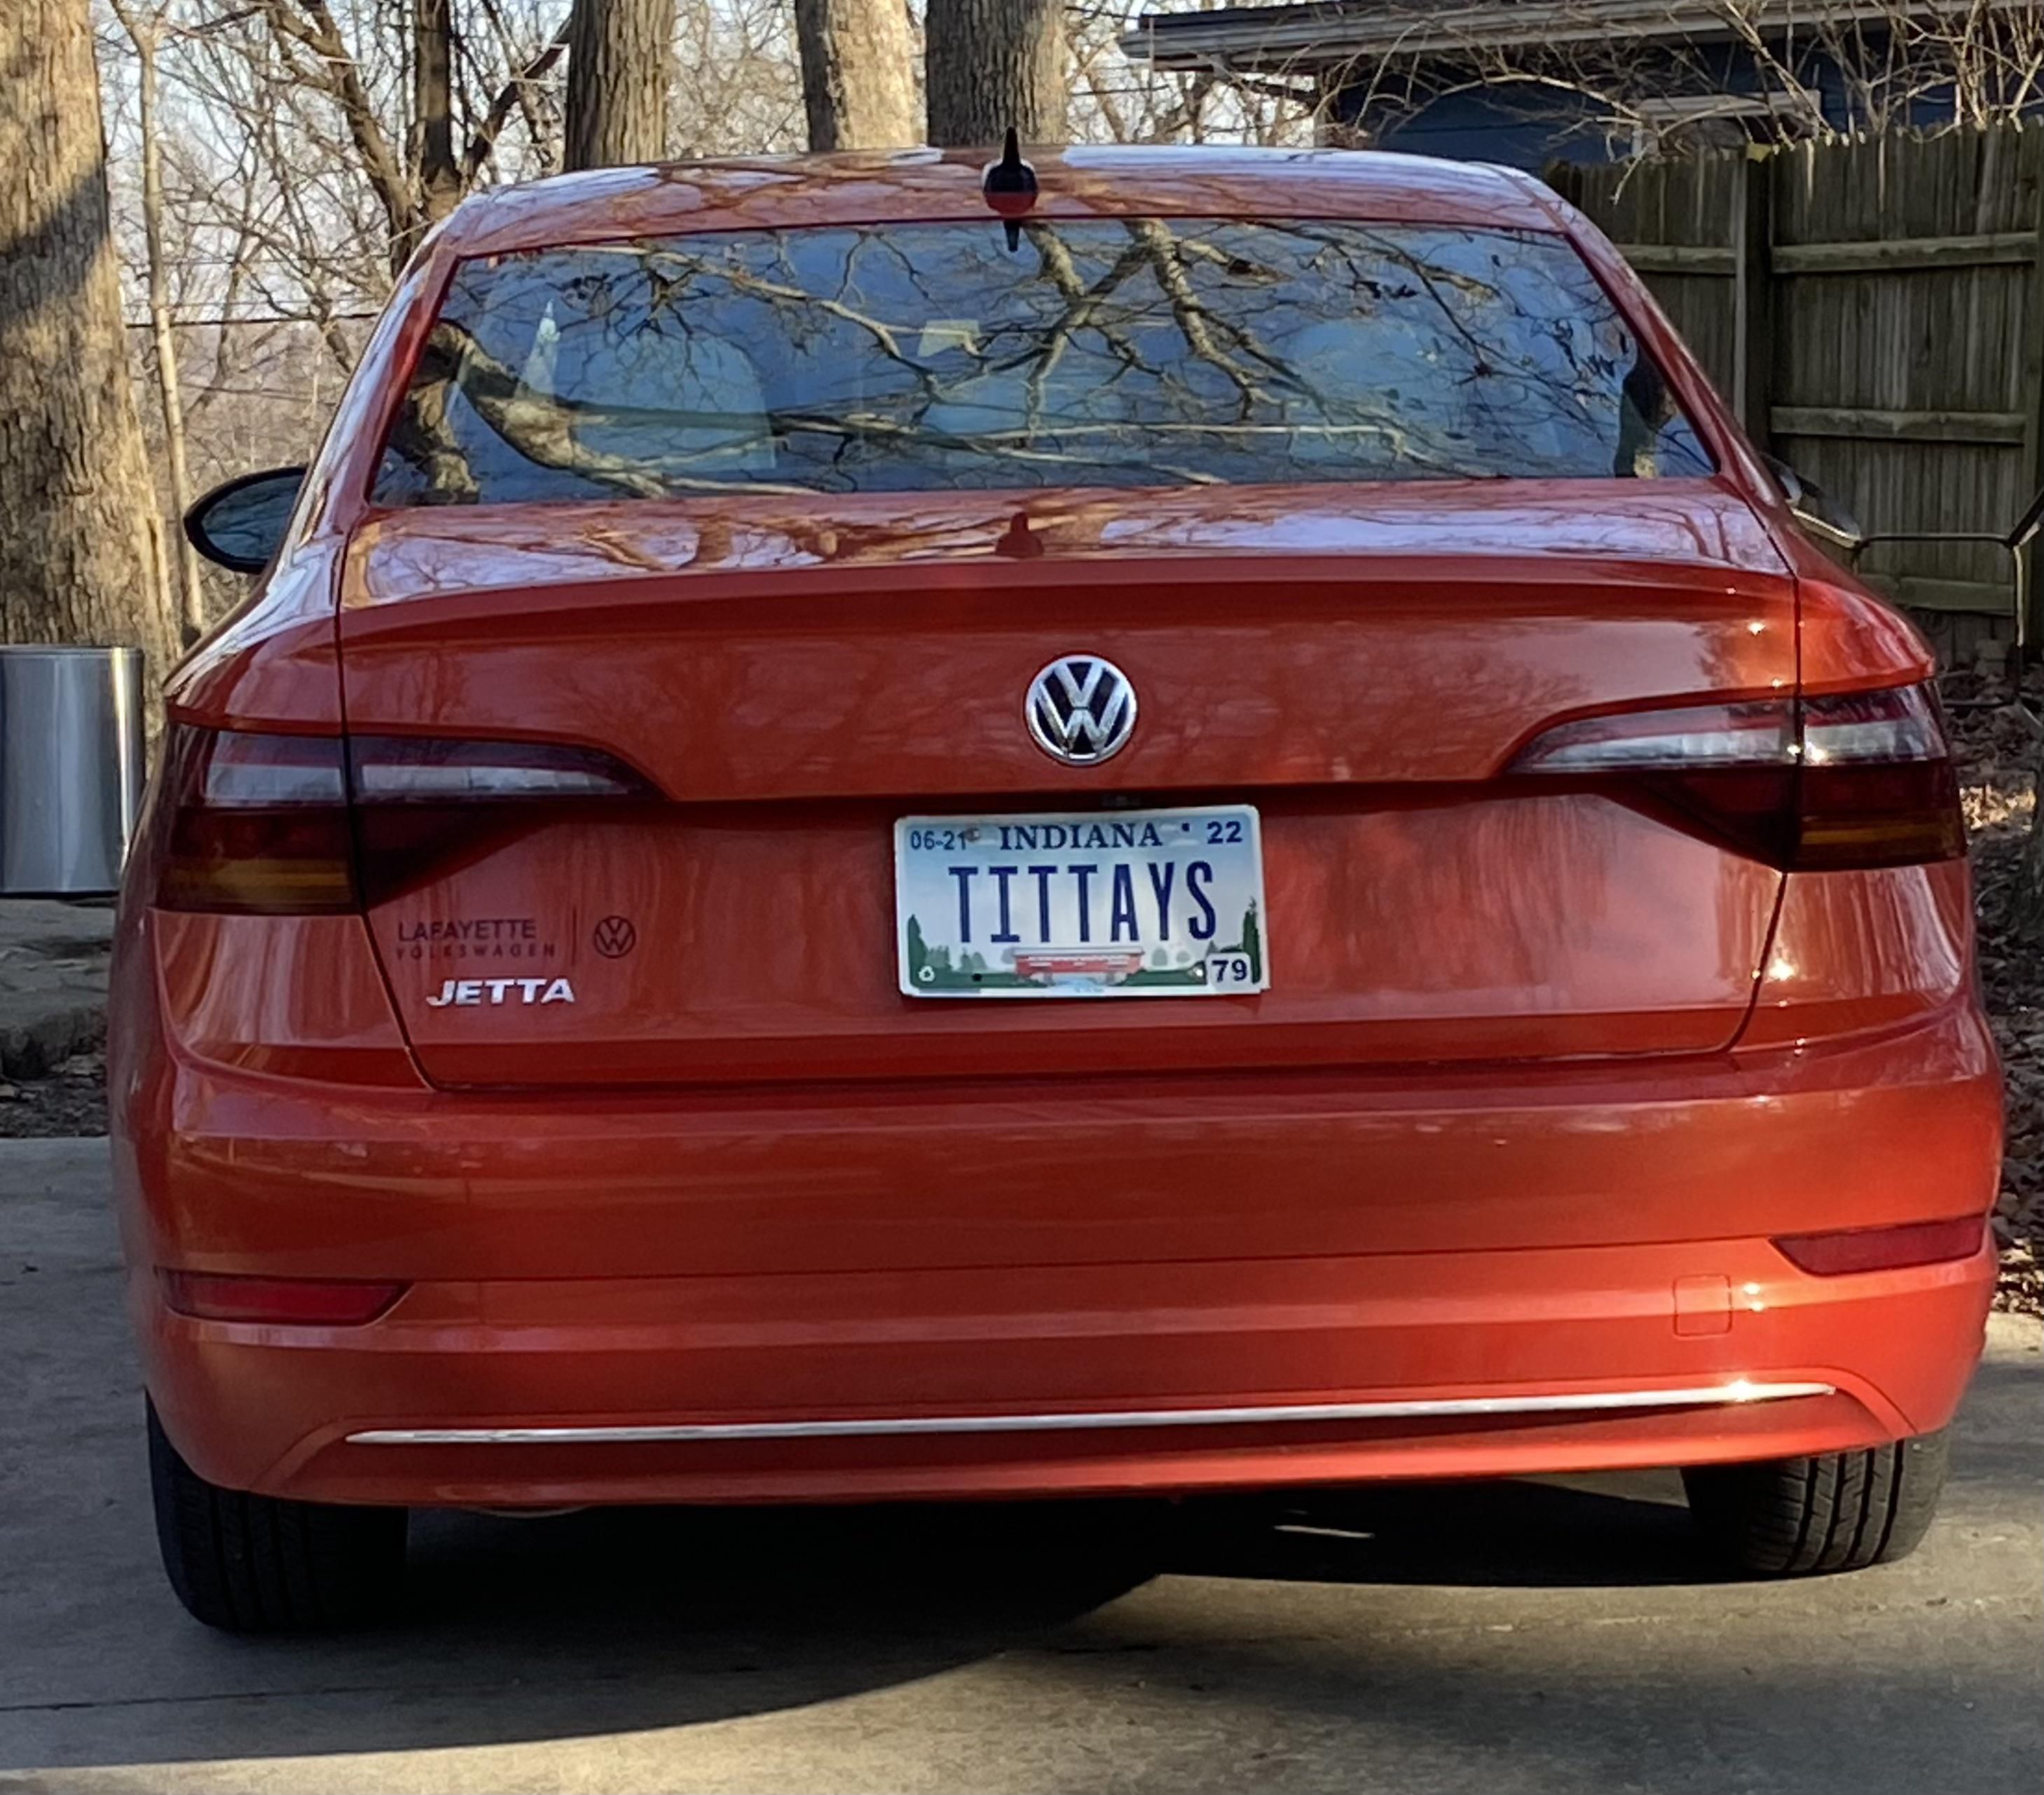 Indiana license plate approval office staffed entirely by 15-year old boys